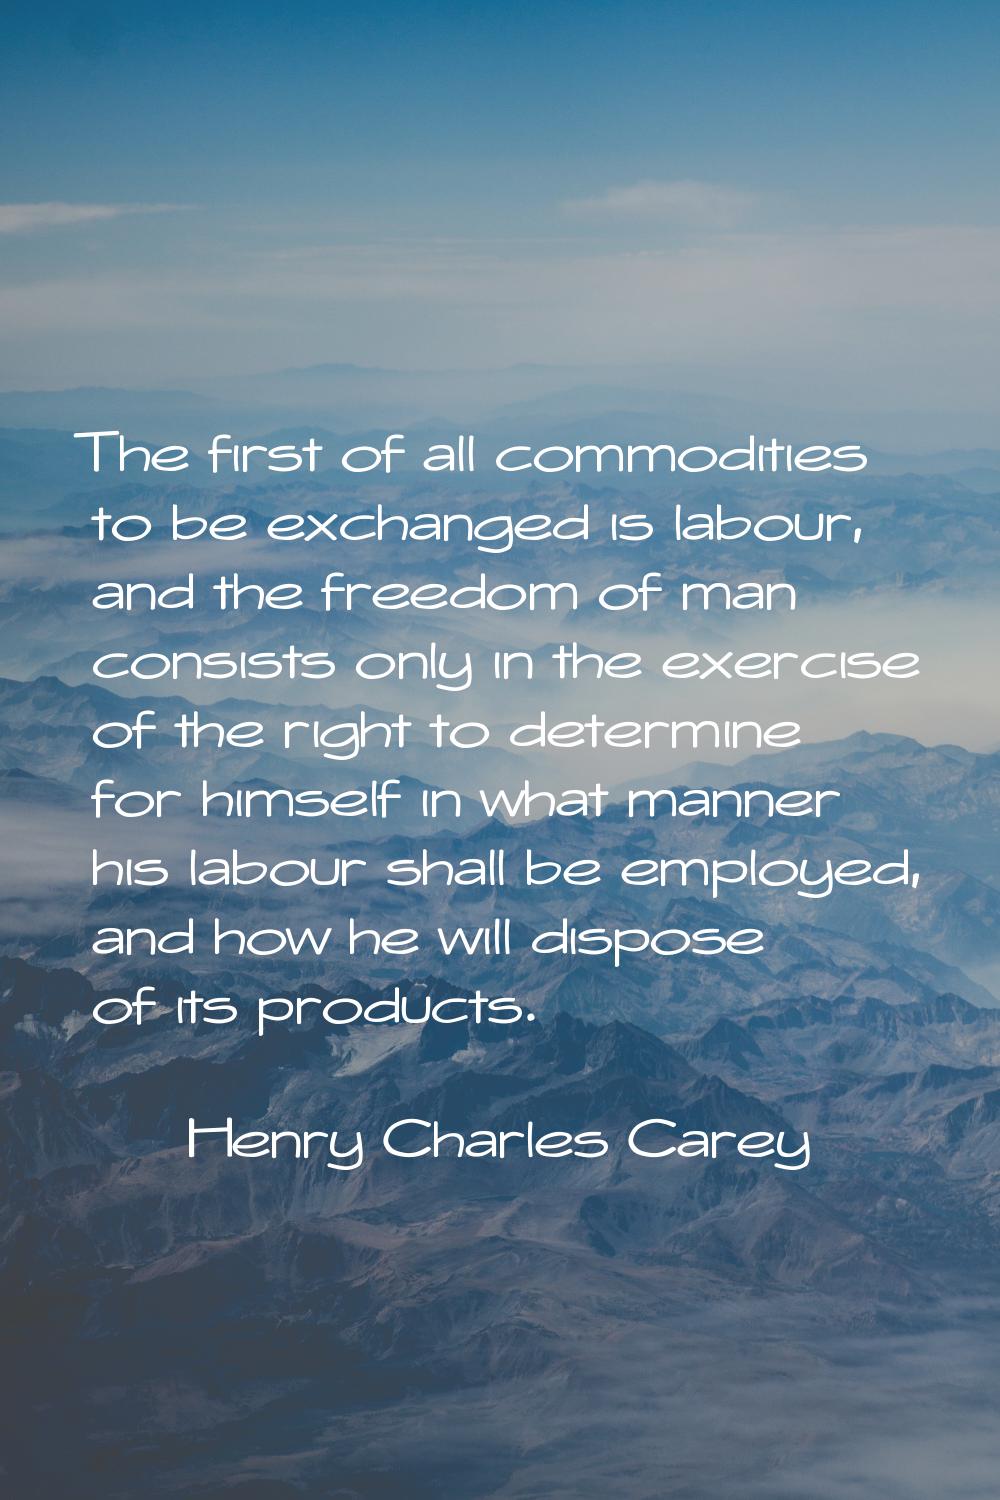 The first of all commodities to be exchanged is labour, and the freedom of man consists only in the